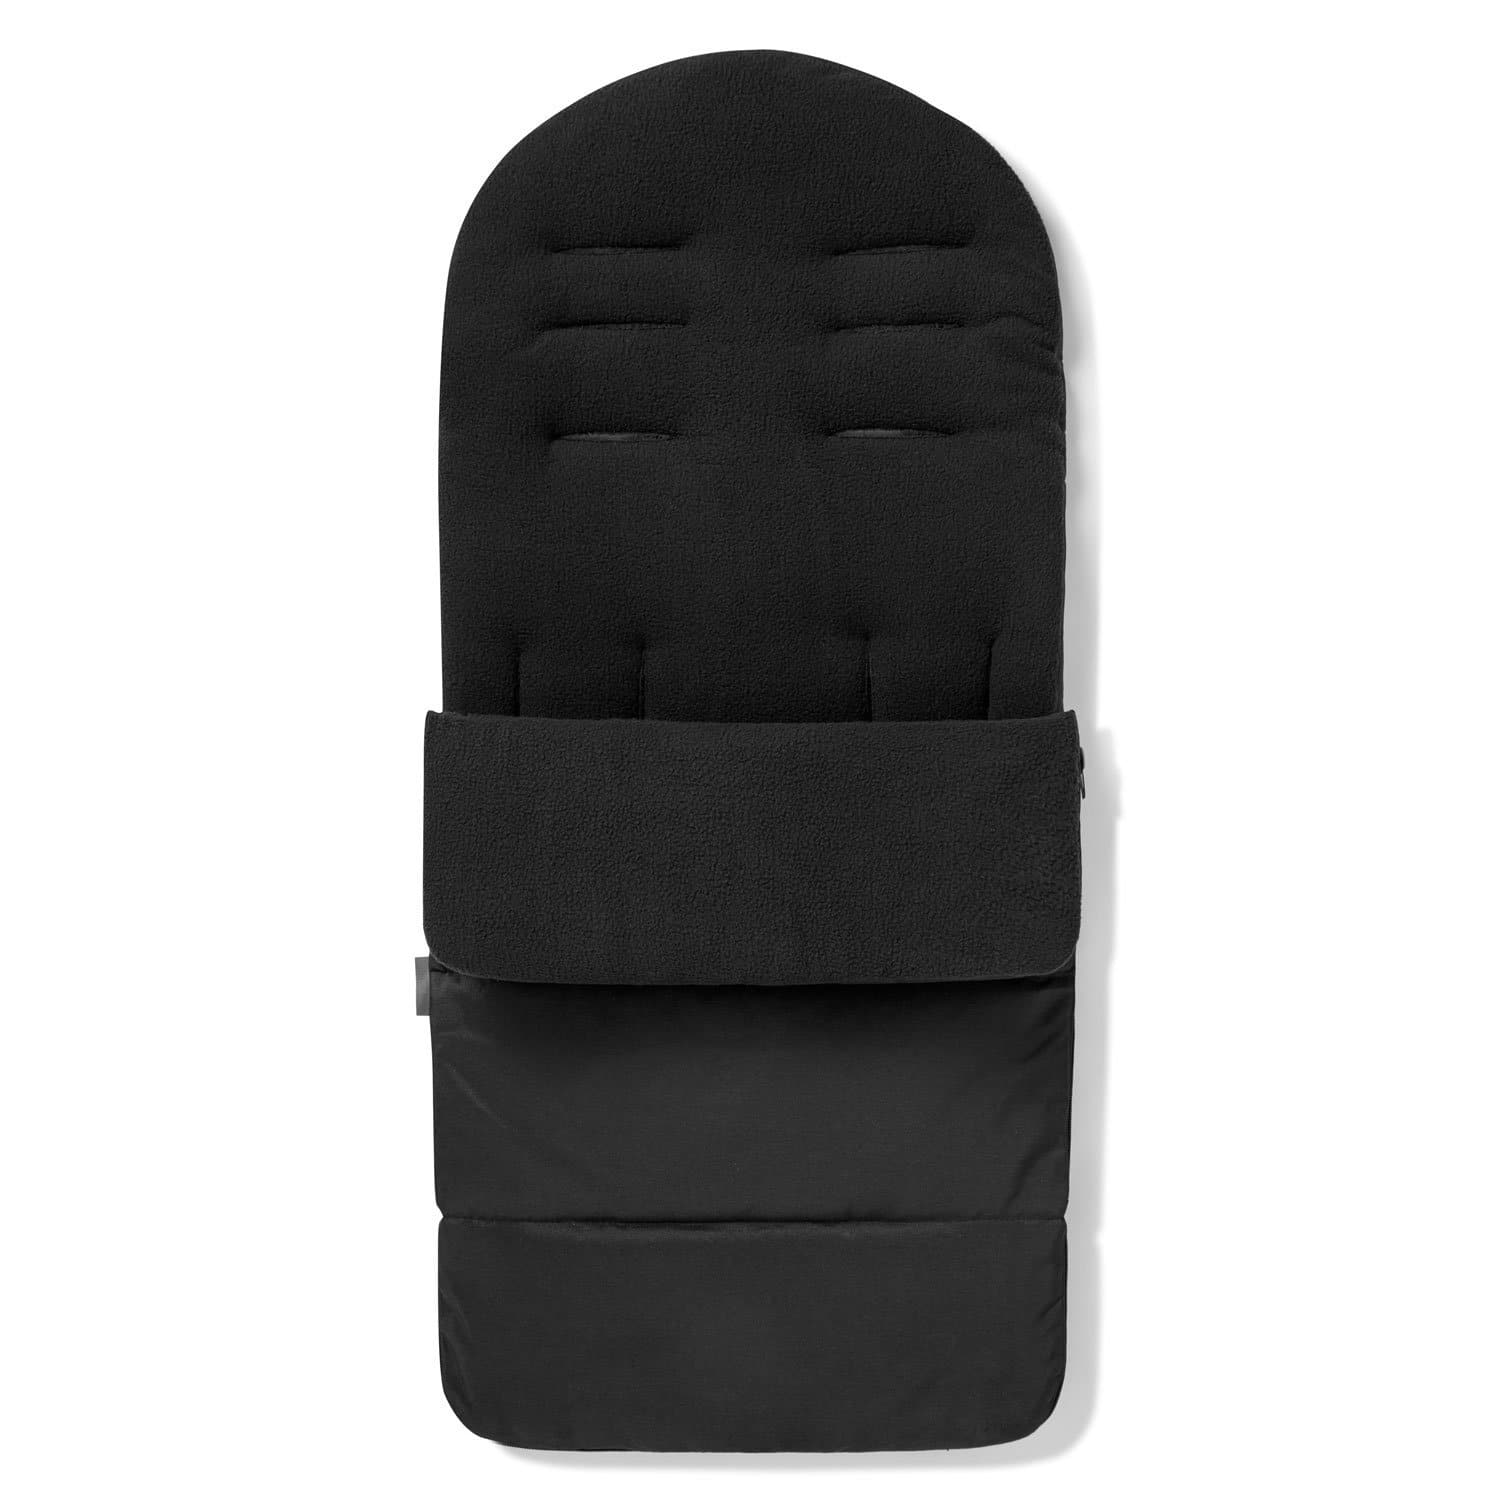 Premium Footmuff / Cosy Toes Compatible with Red Castle - Black Jack / Fits All Models | For Your Little One